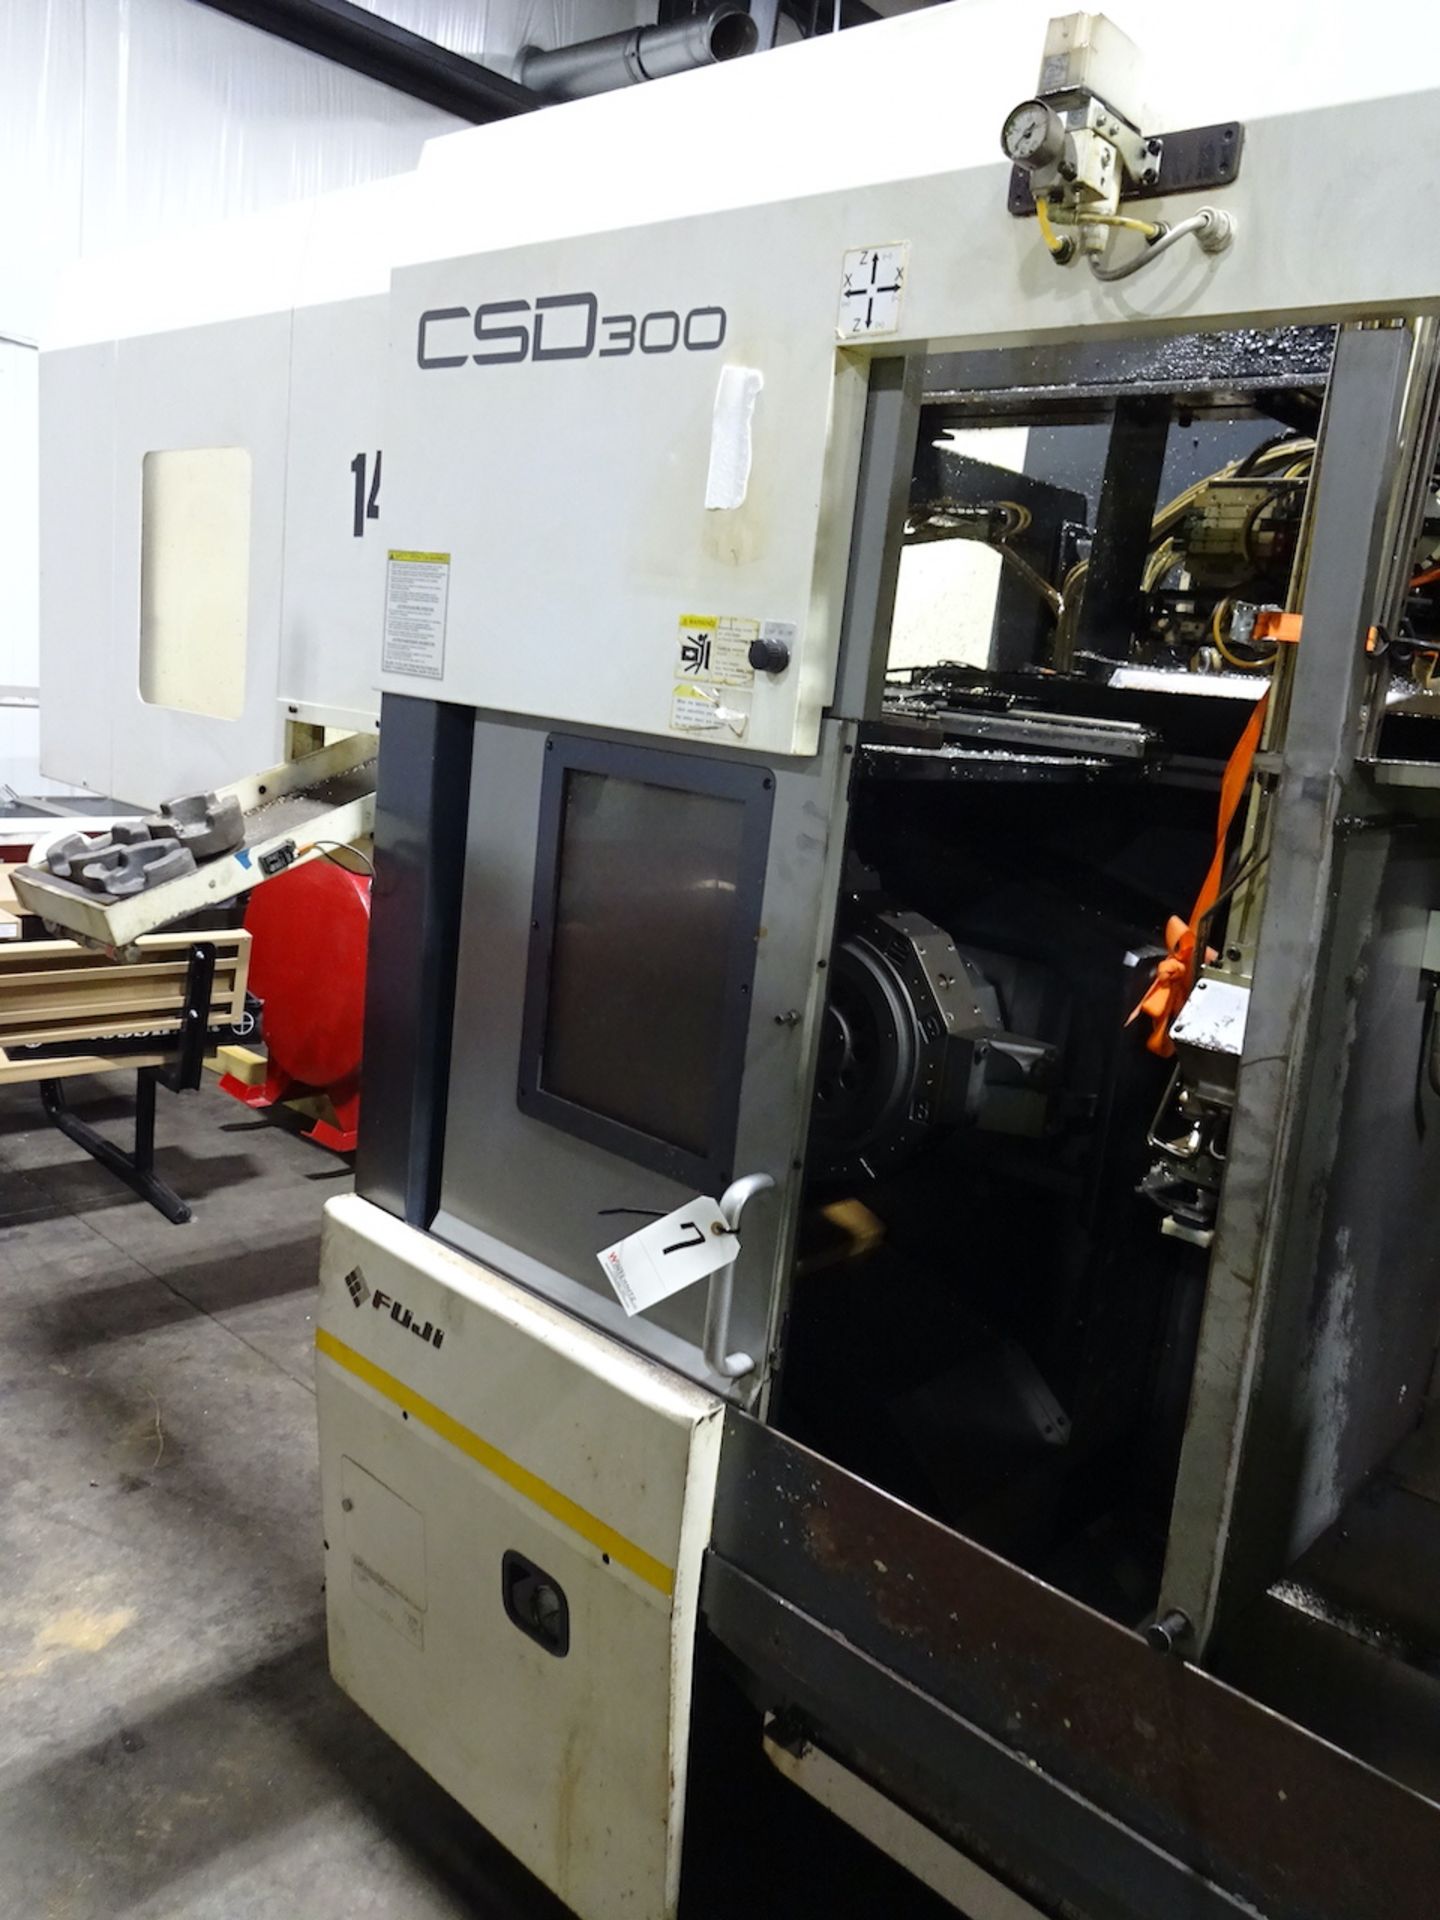 FUJI CSD-300 TWIN SPINDLE CNC LATHE (2014) S/N SE0102377, GANTRY LOAD AND STOCKER TABLE, RECOMMENDED - Image 6 of 25